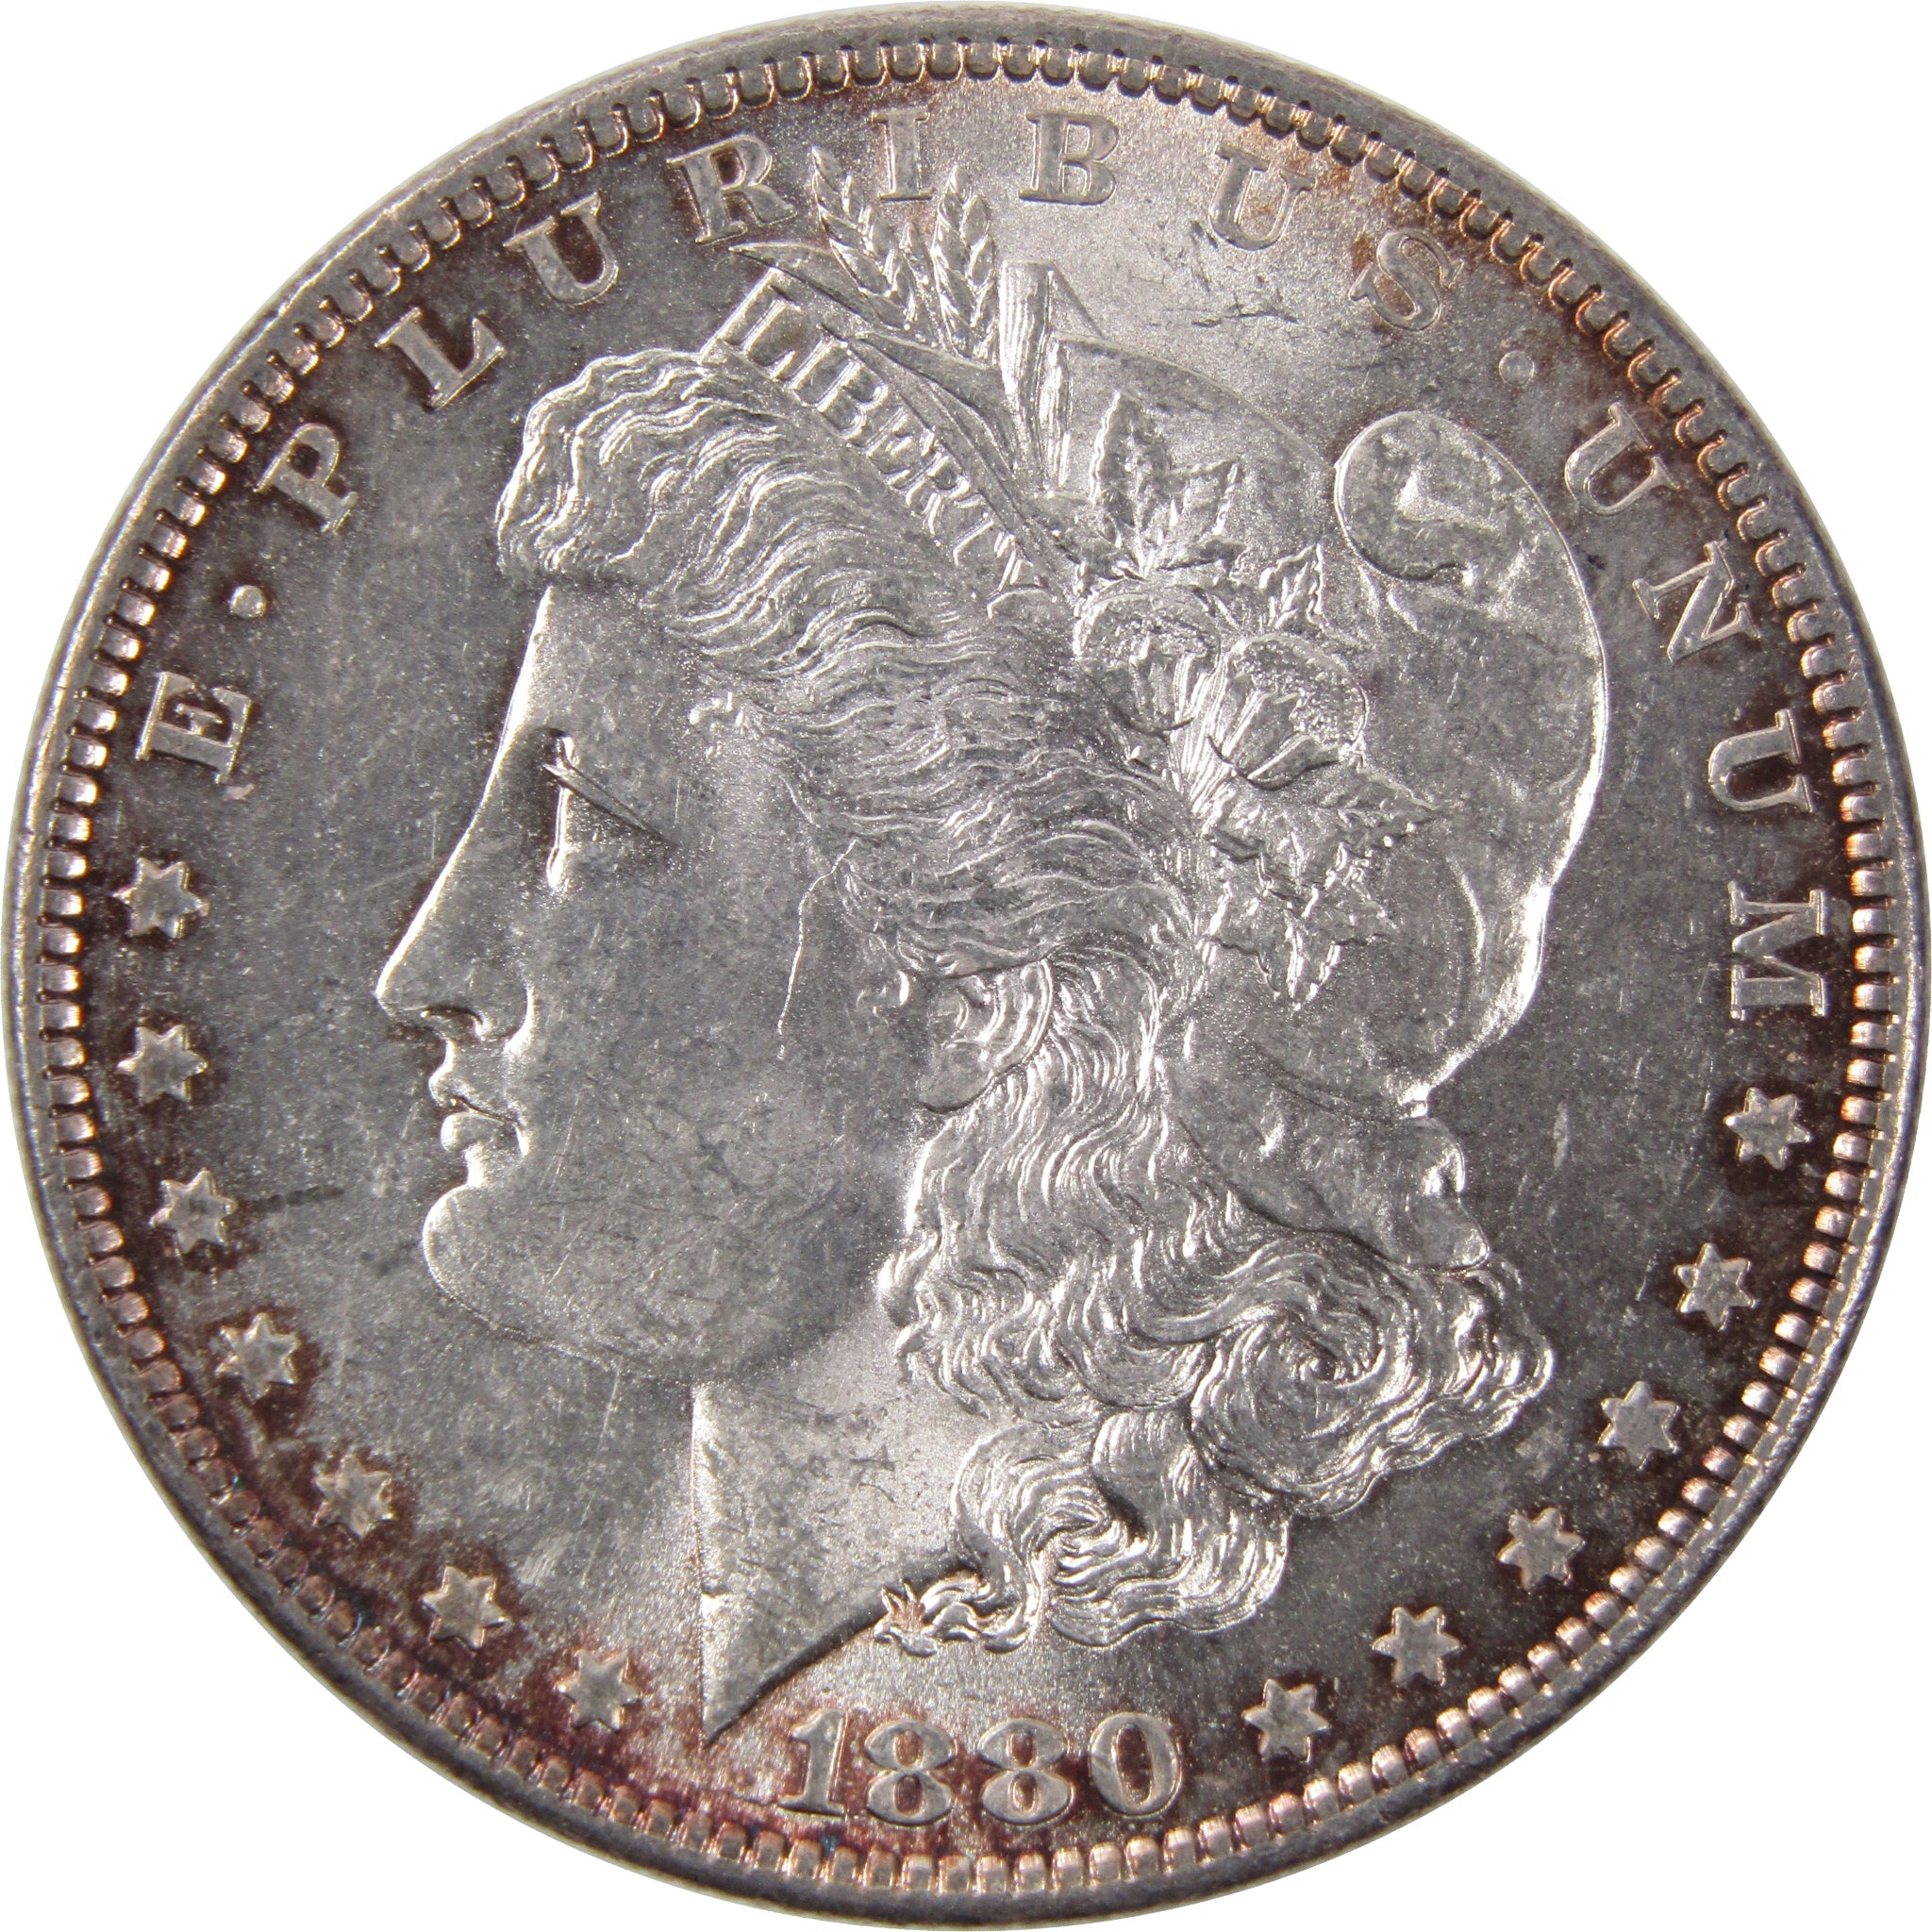 1880 O Morgan Dollar BU Uncirculated Mint State 90% Silver SKU:I2496 - Morgan coin - Morgan silver dollar - Morgan silver dollar for sale - Profile Coins &amp; Collectibles